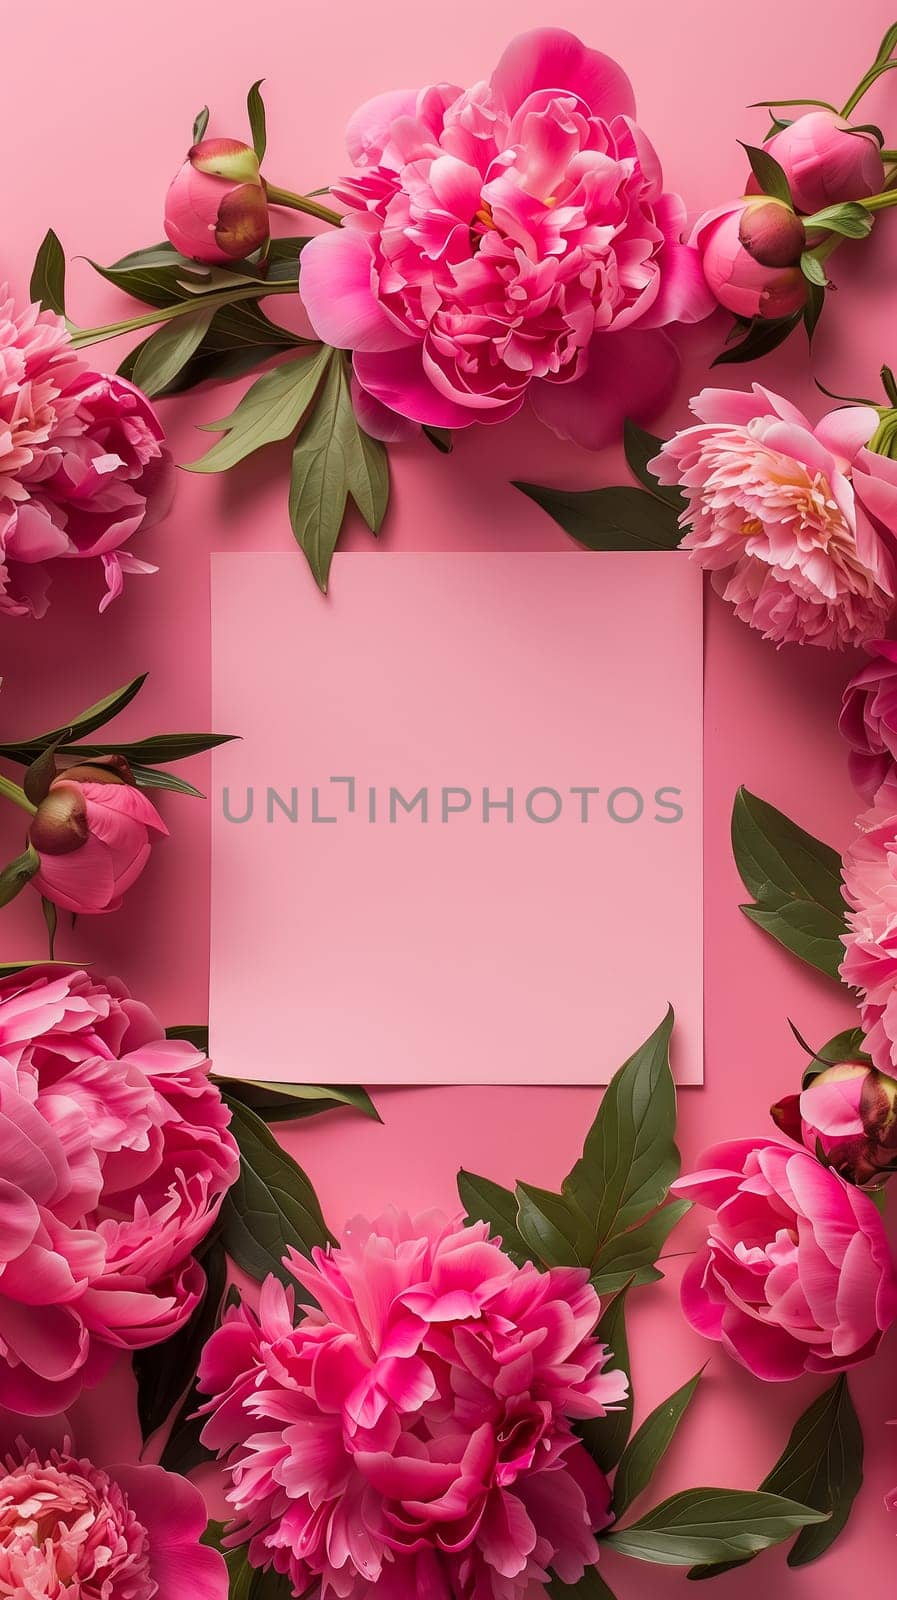 Flowers composition. Wreath made of pink peonies flowers, blank square paper sheet on pink background. Flat lay, top view, copy space. Aesthetic Valentine's Day, Mother's Day mockup template.